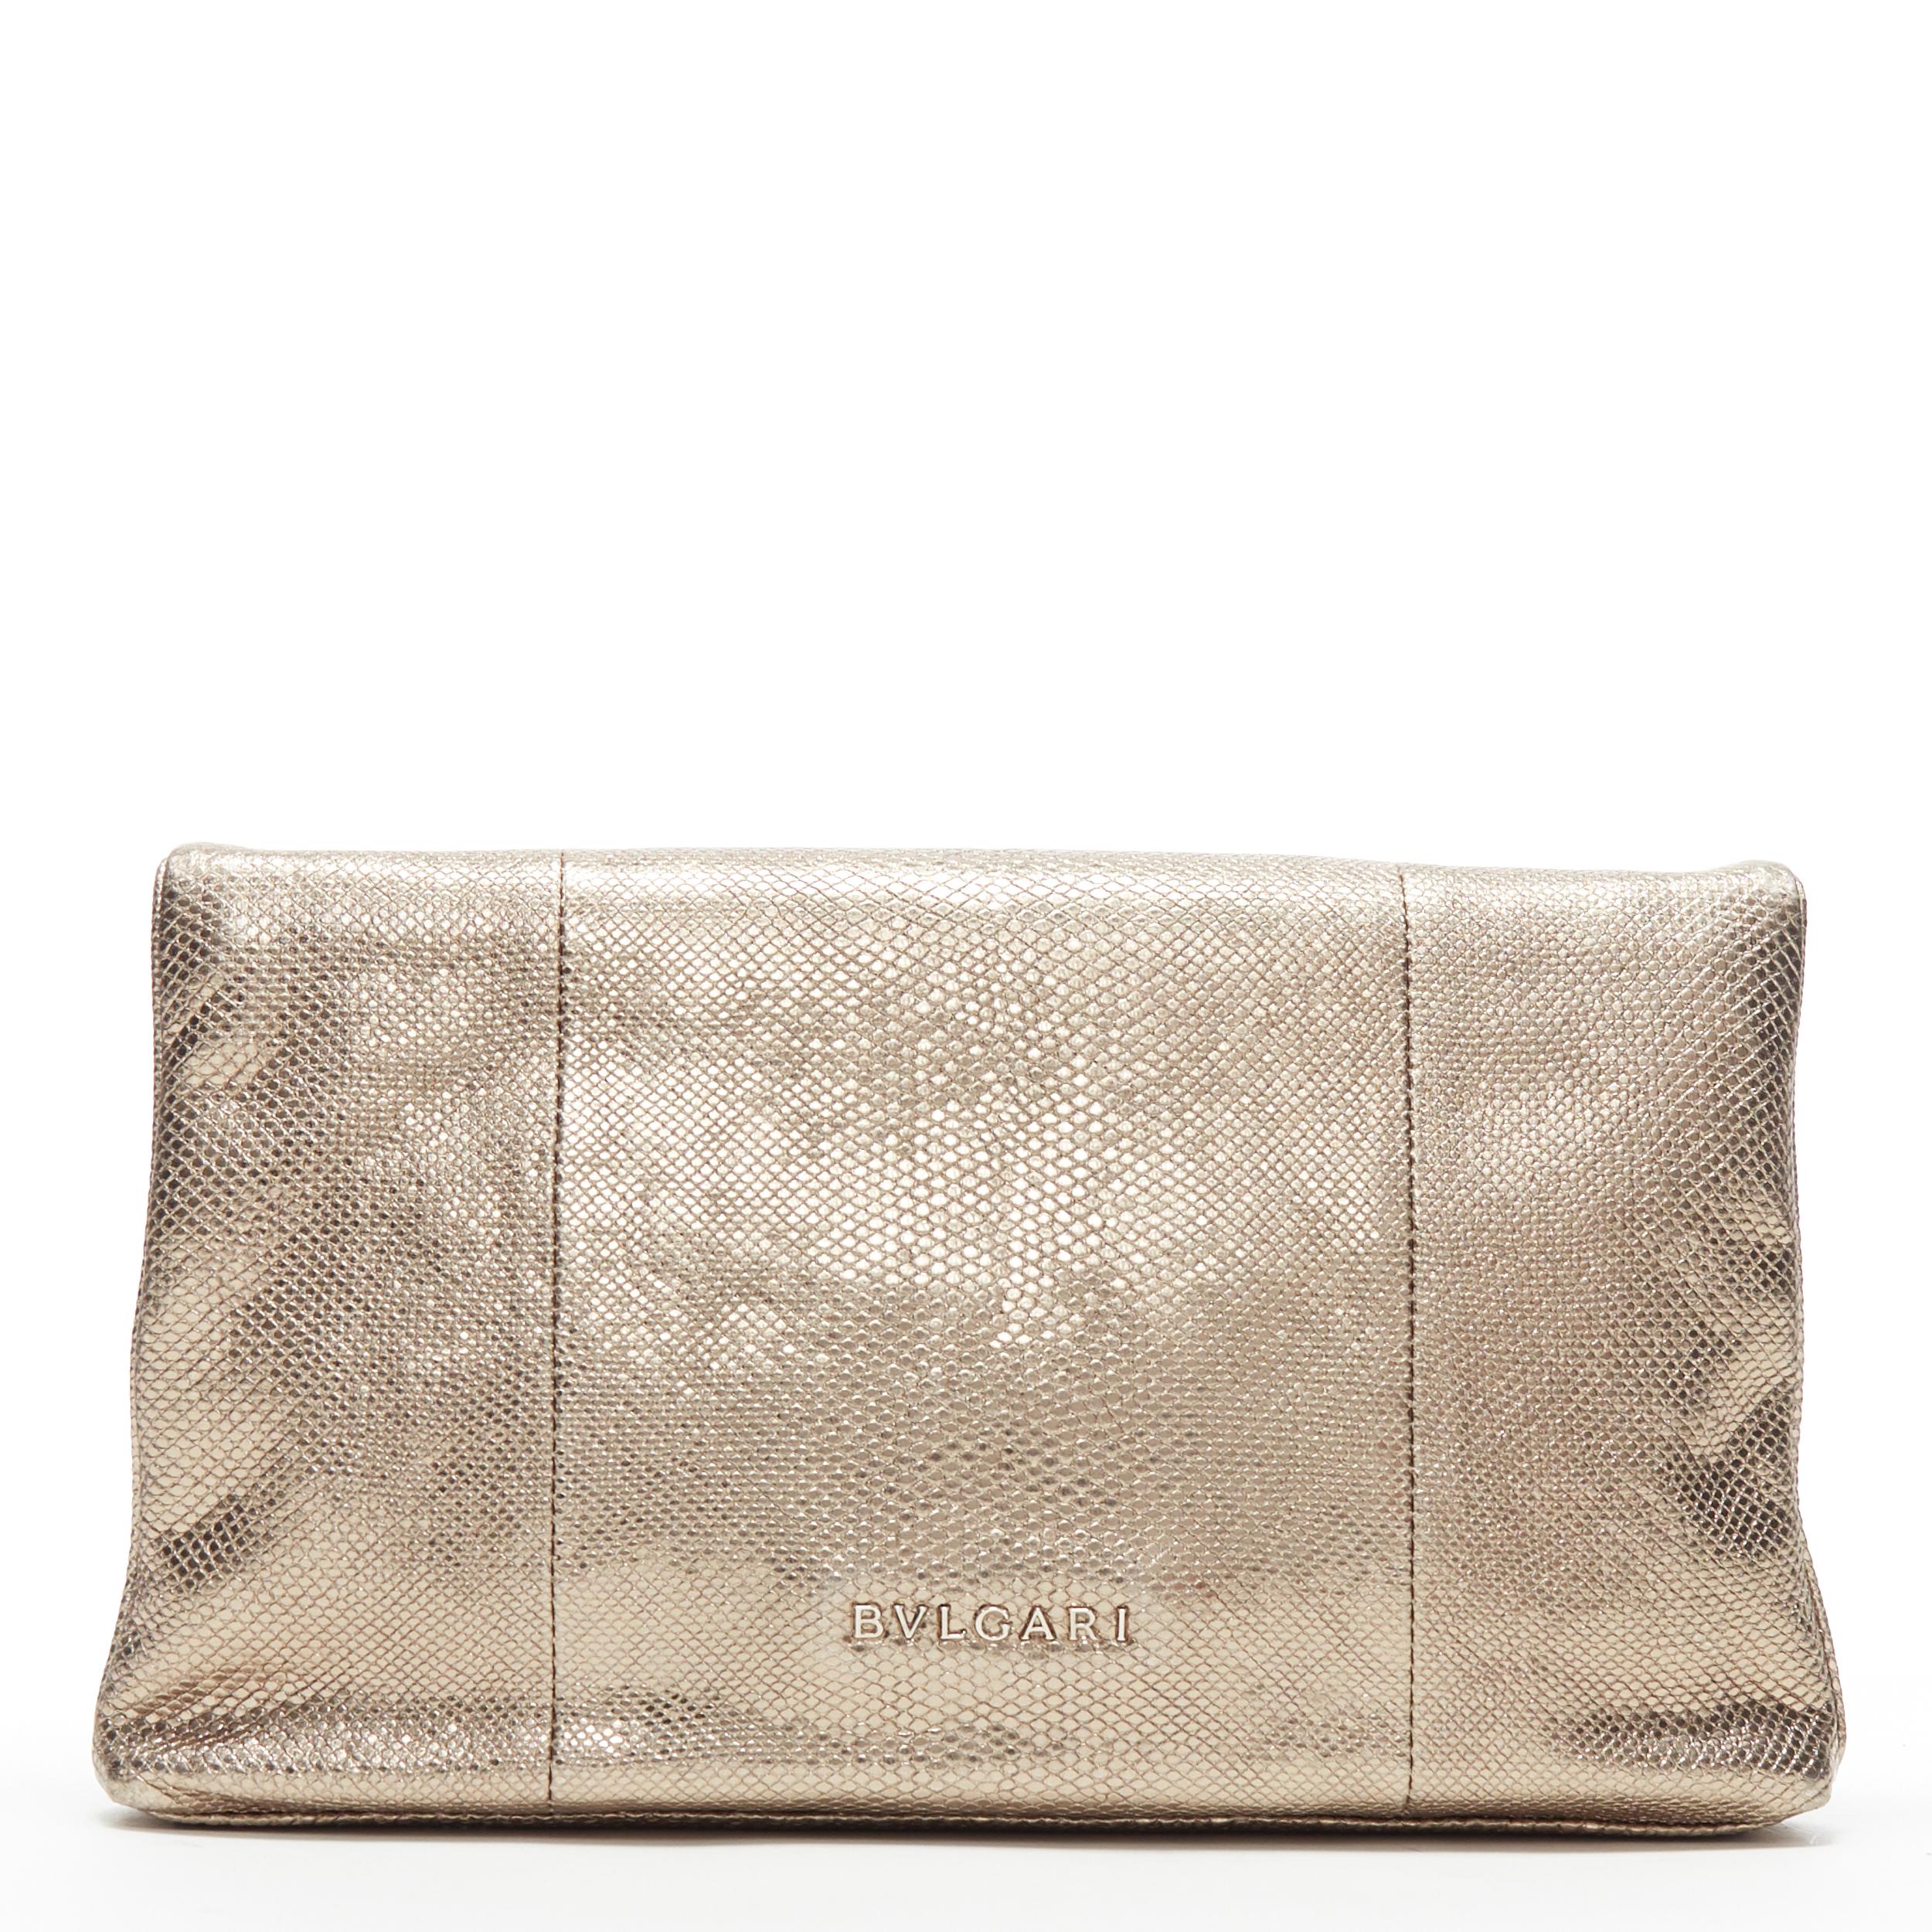 BVLGARI metallic gold leather silver buckle foldover shoulder chain clutch bag
Brand: Bvlgari
Model Name / Style: Foldover clutch
Material: Leather
Color: Gold
Pattern: Solid
Closure: Magnetic
Extra Detail:
Made in: Italy

CONDITION: 
Condition: